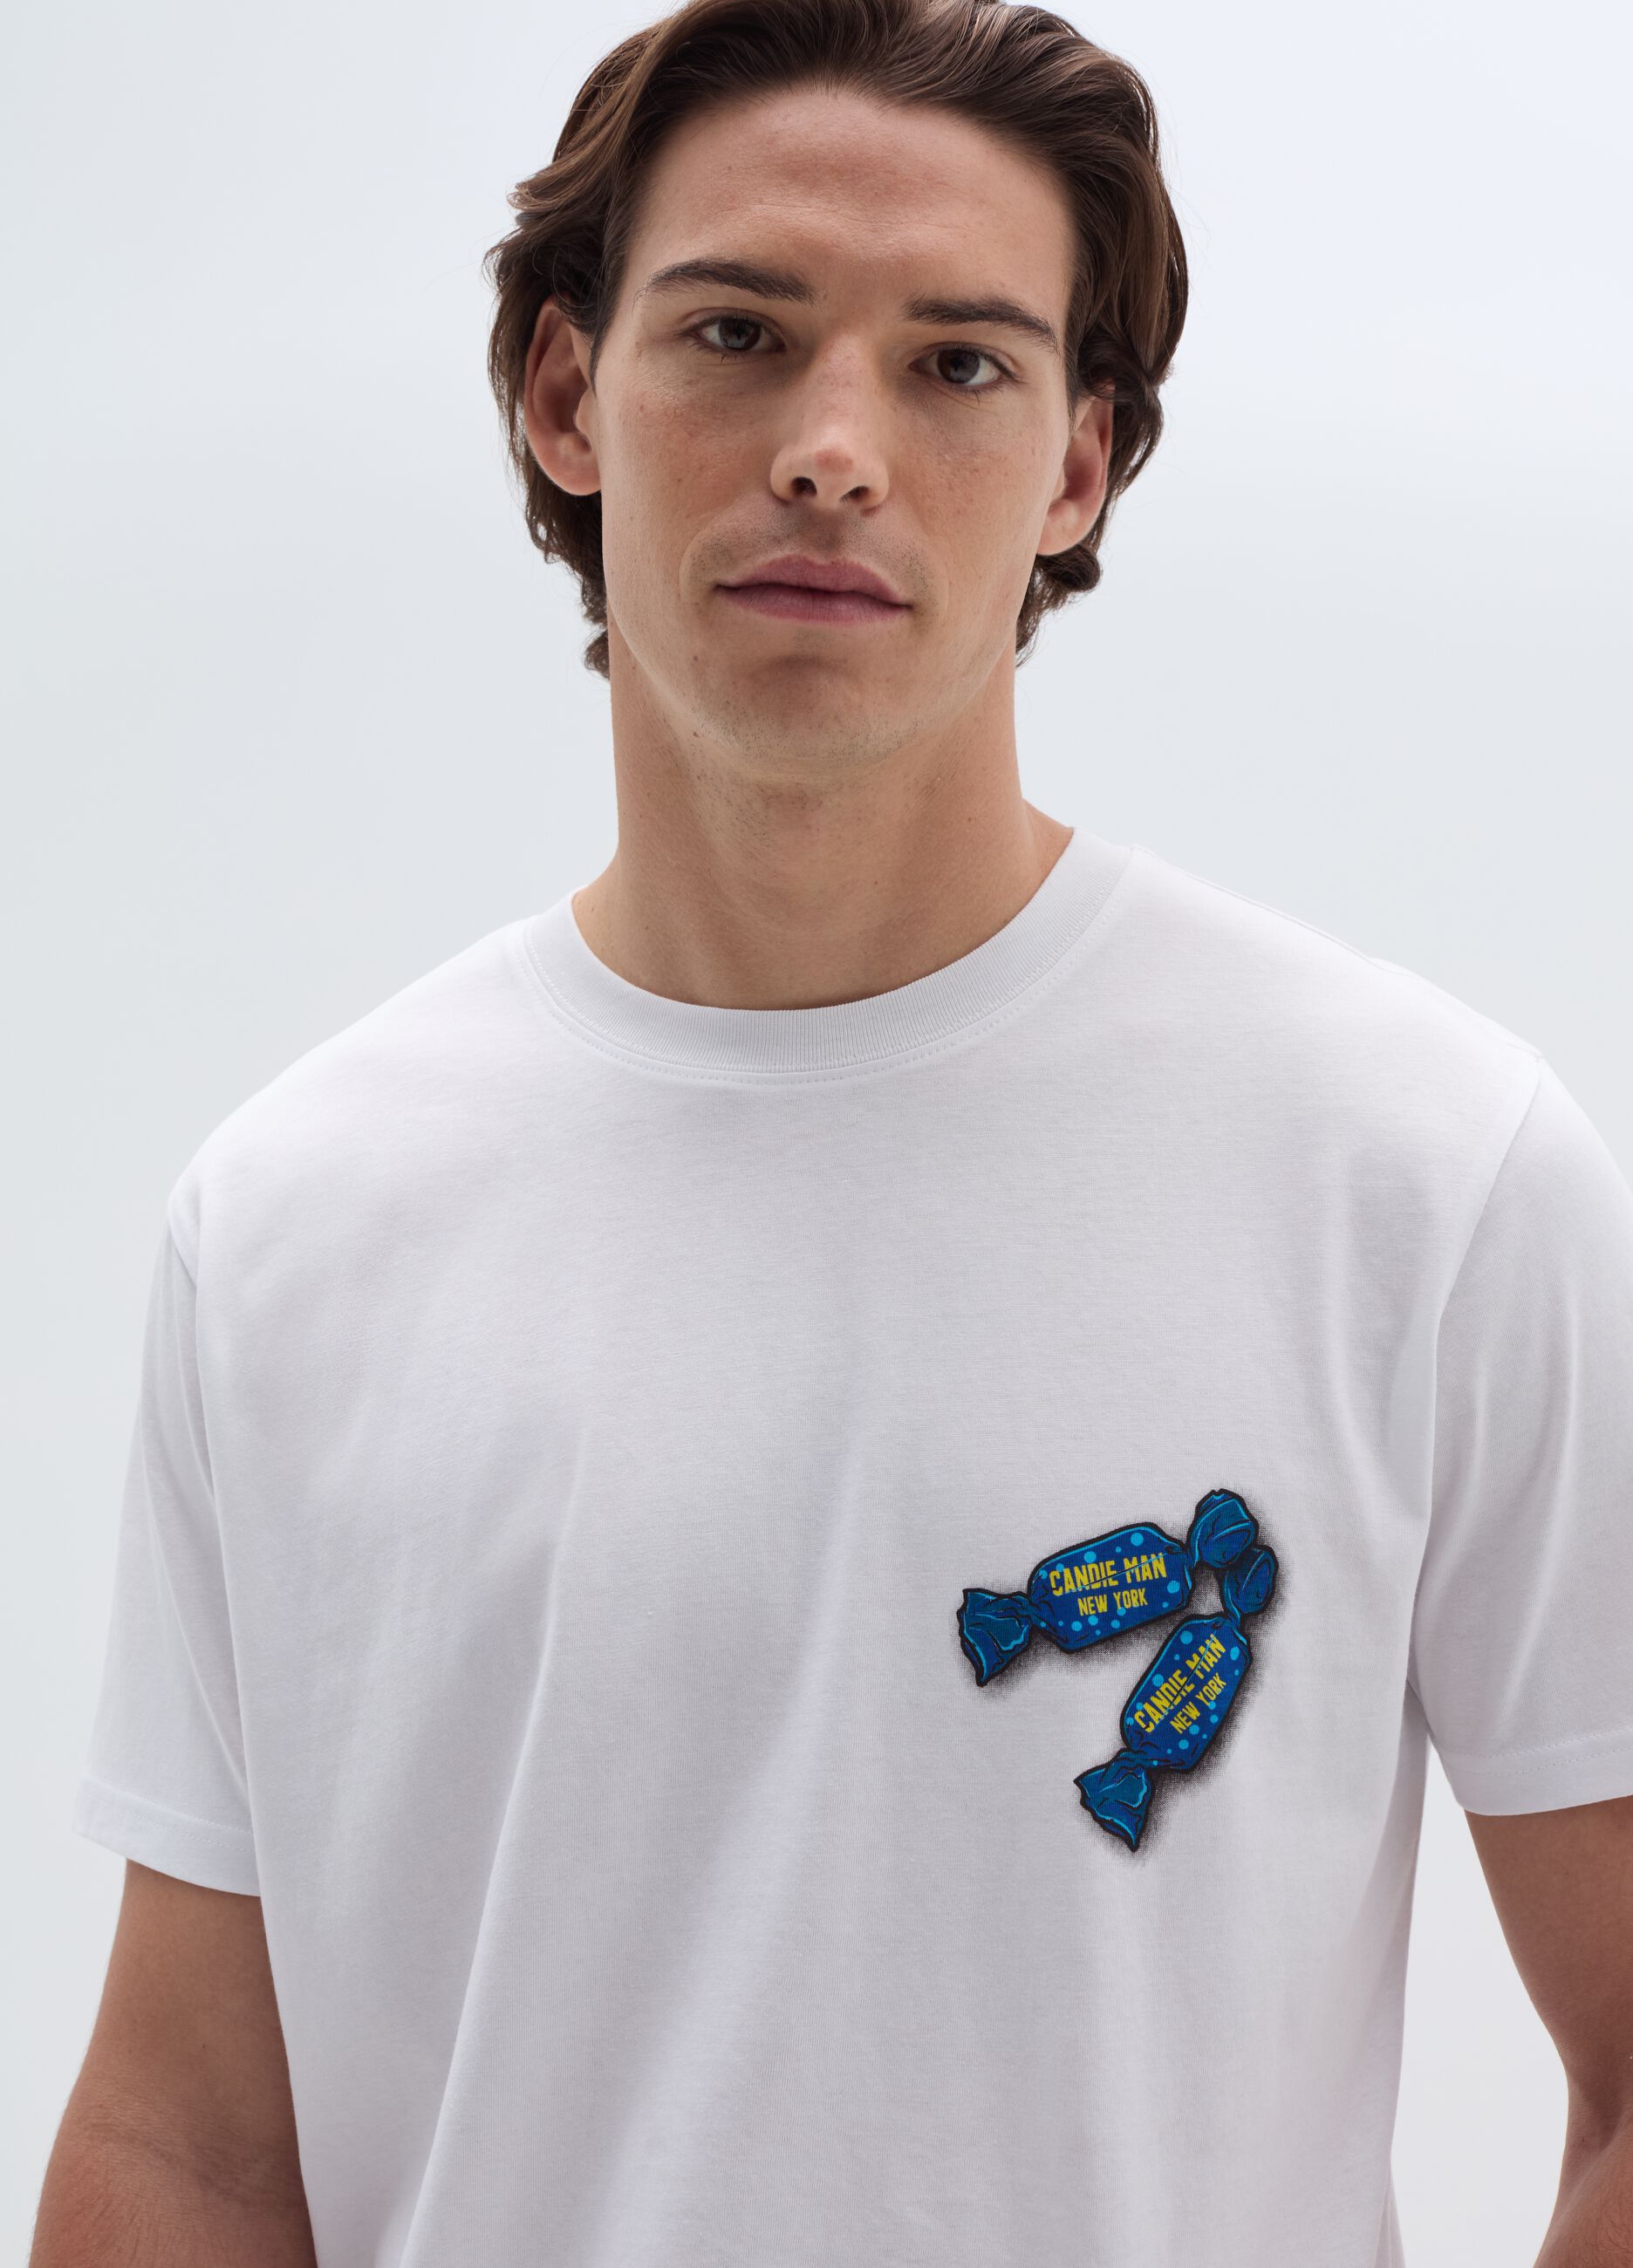 T-shirt in cotone con stampa Candie Man NY